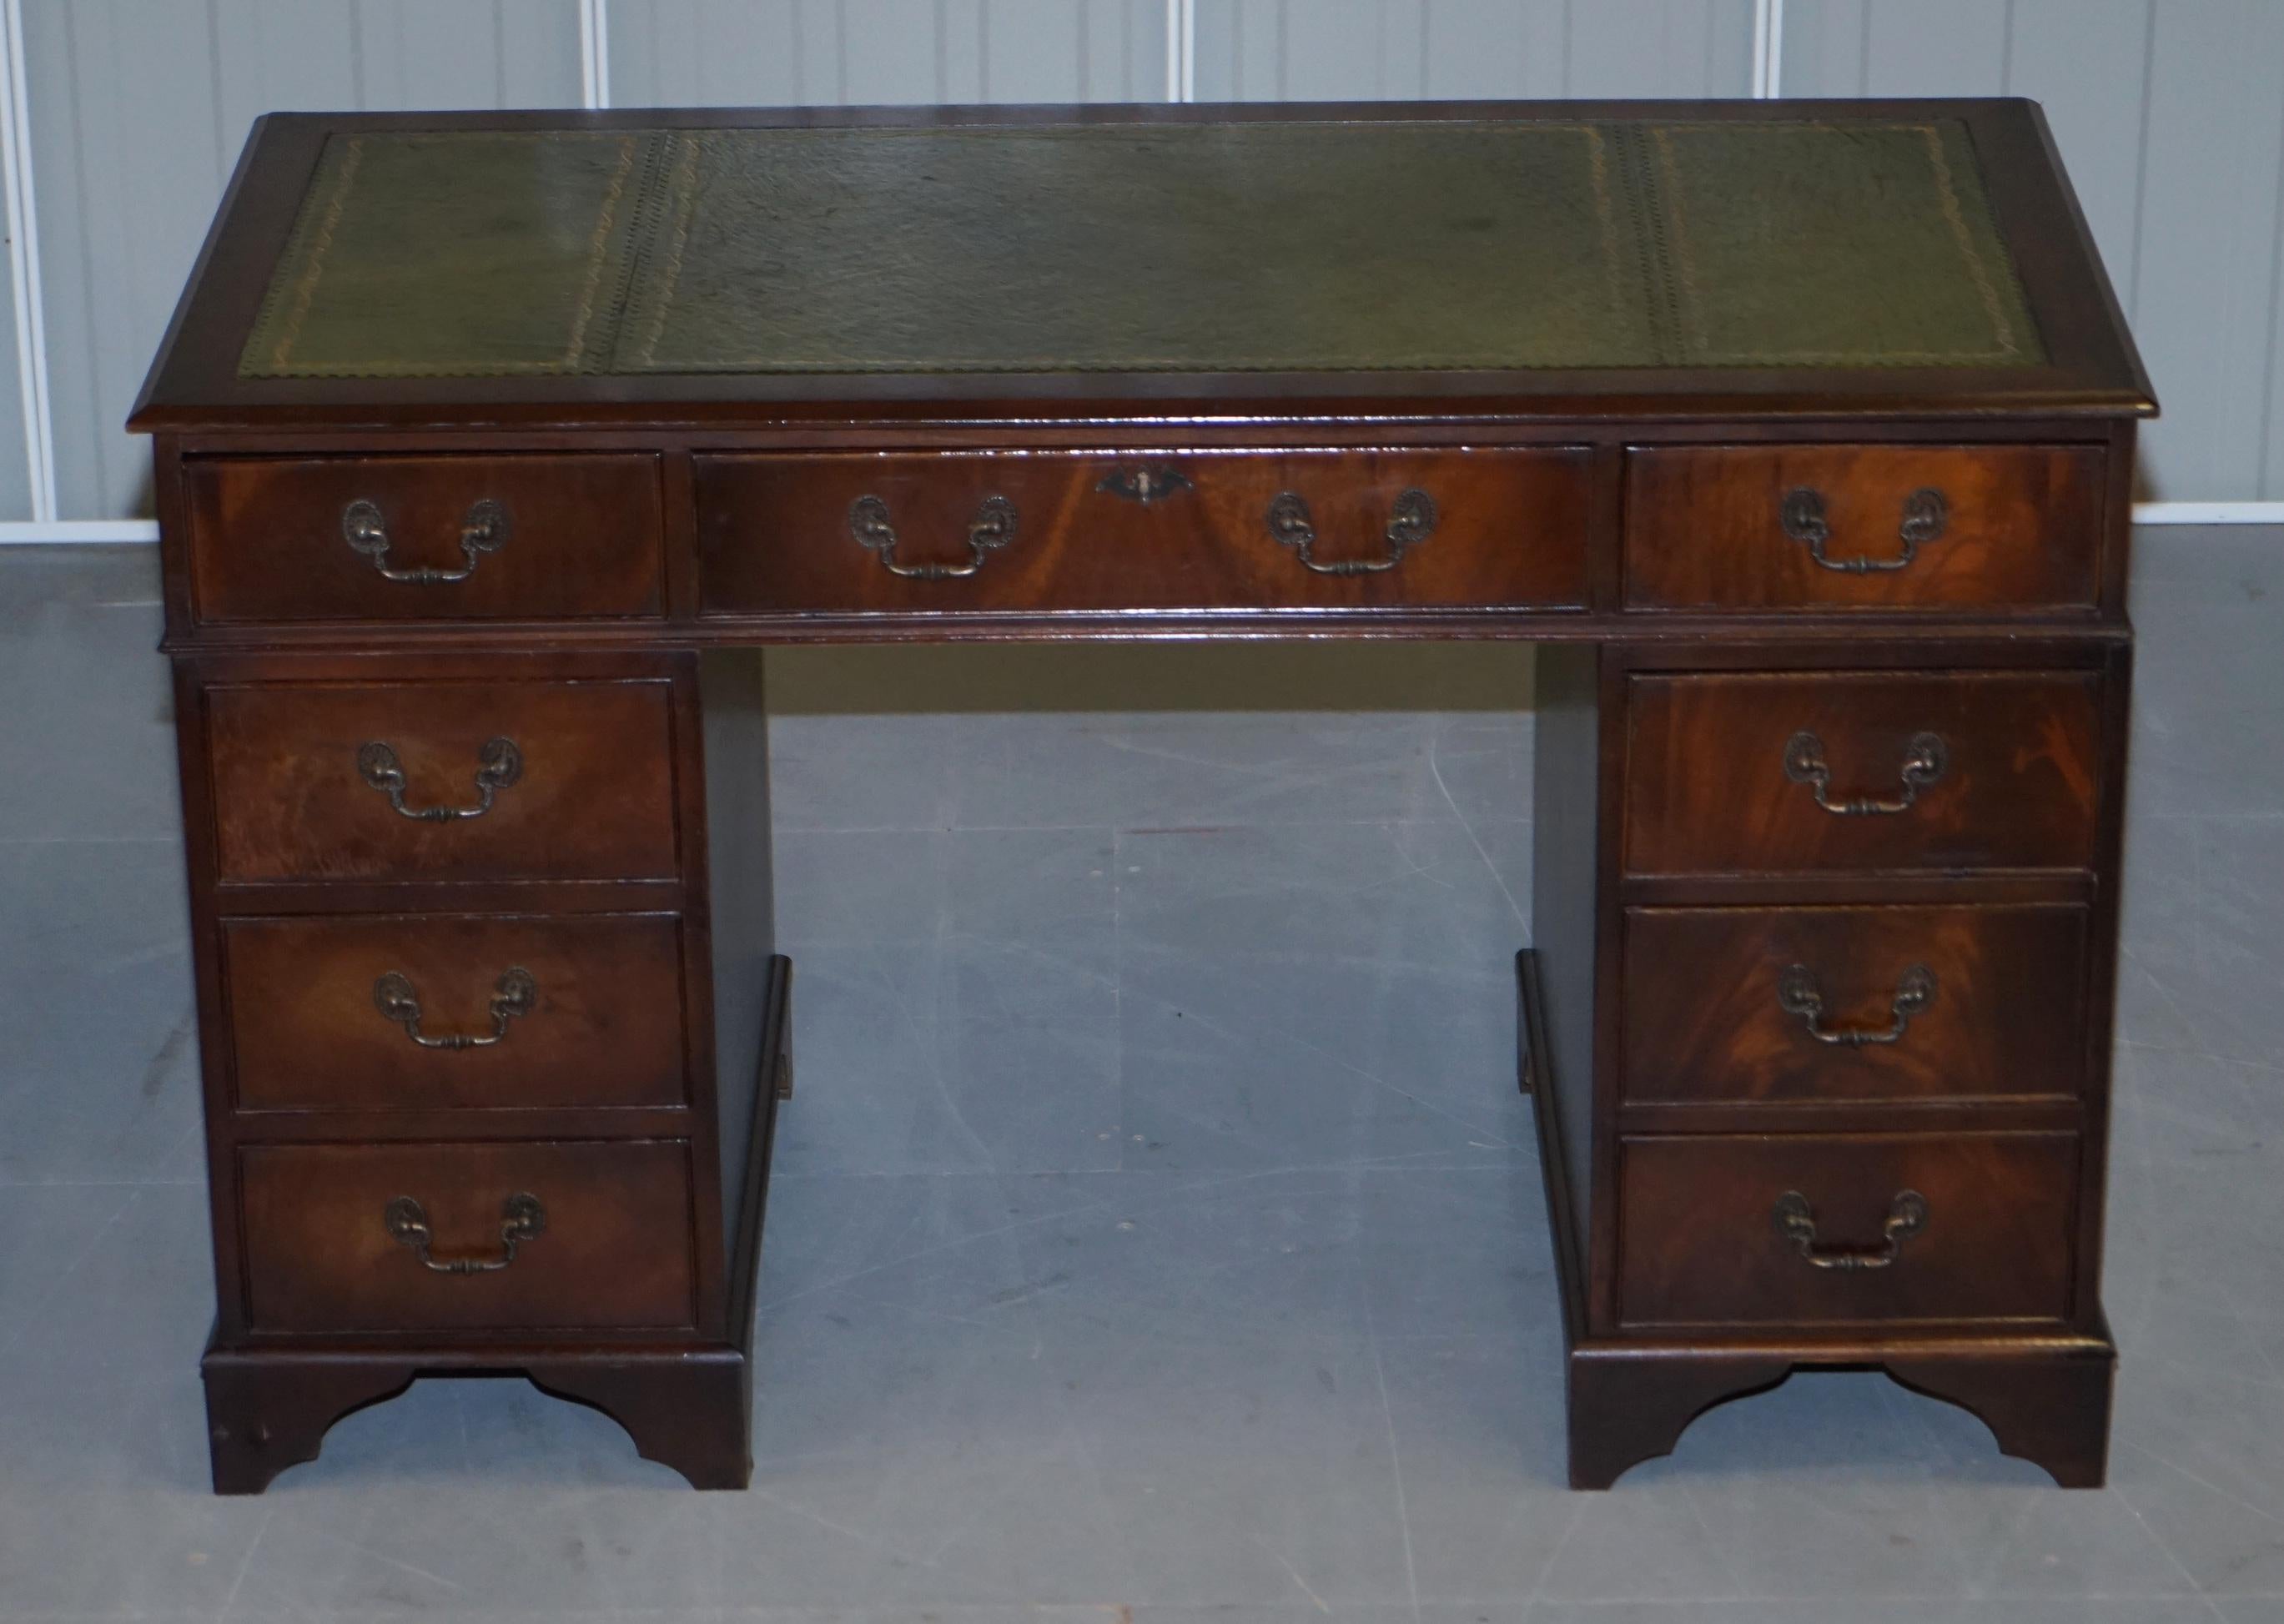 We are delighted to offer for sale this lovely vintage flamed mahogany twin pedestal partner desk with aged green leather writing surface

The desk splits into three easy to transport pieces, it has a flamed mahogany finish with a gold tooled